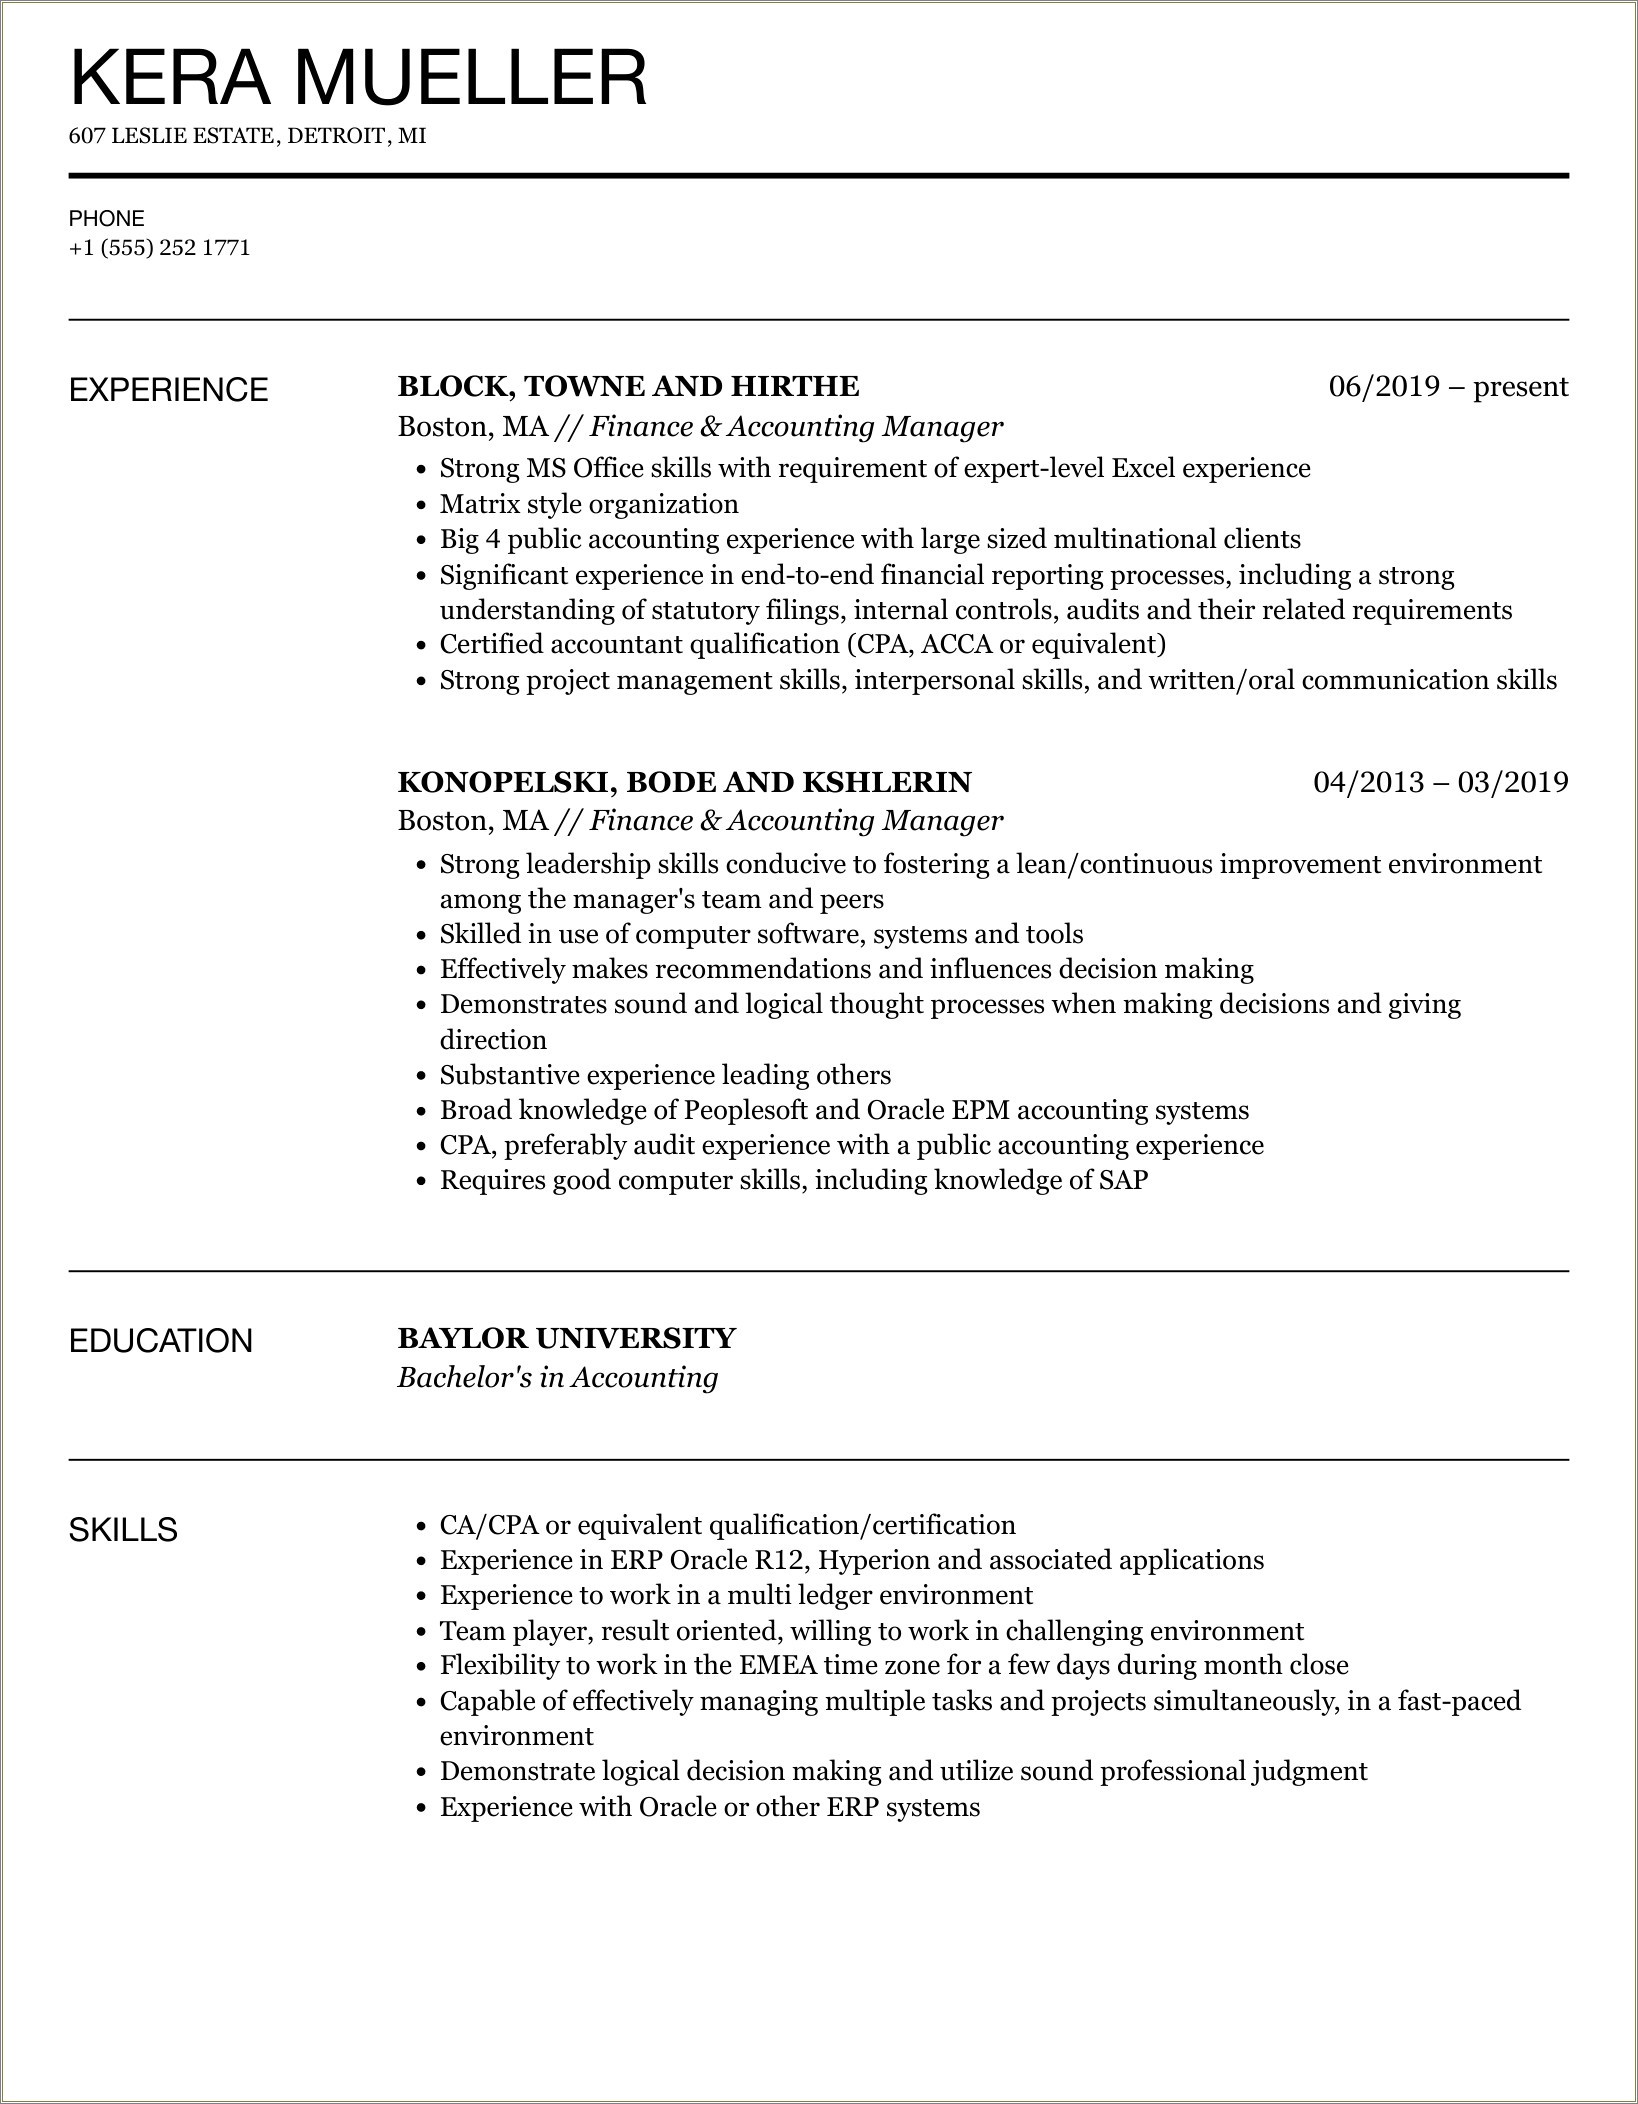 Account Manager Resume Sample In India